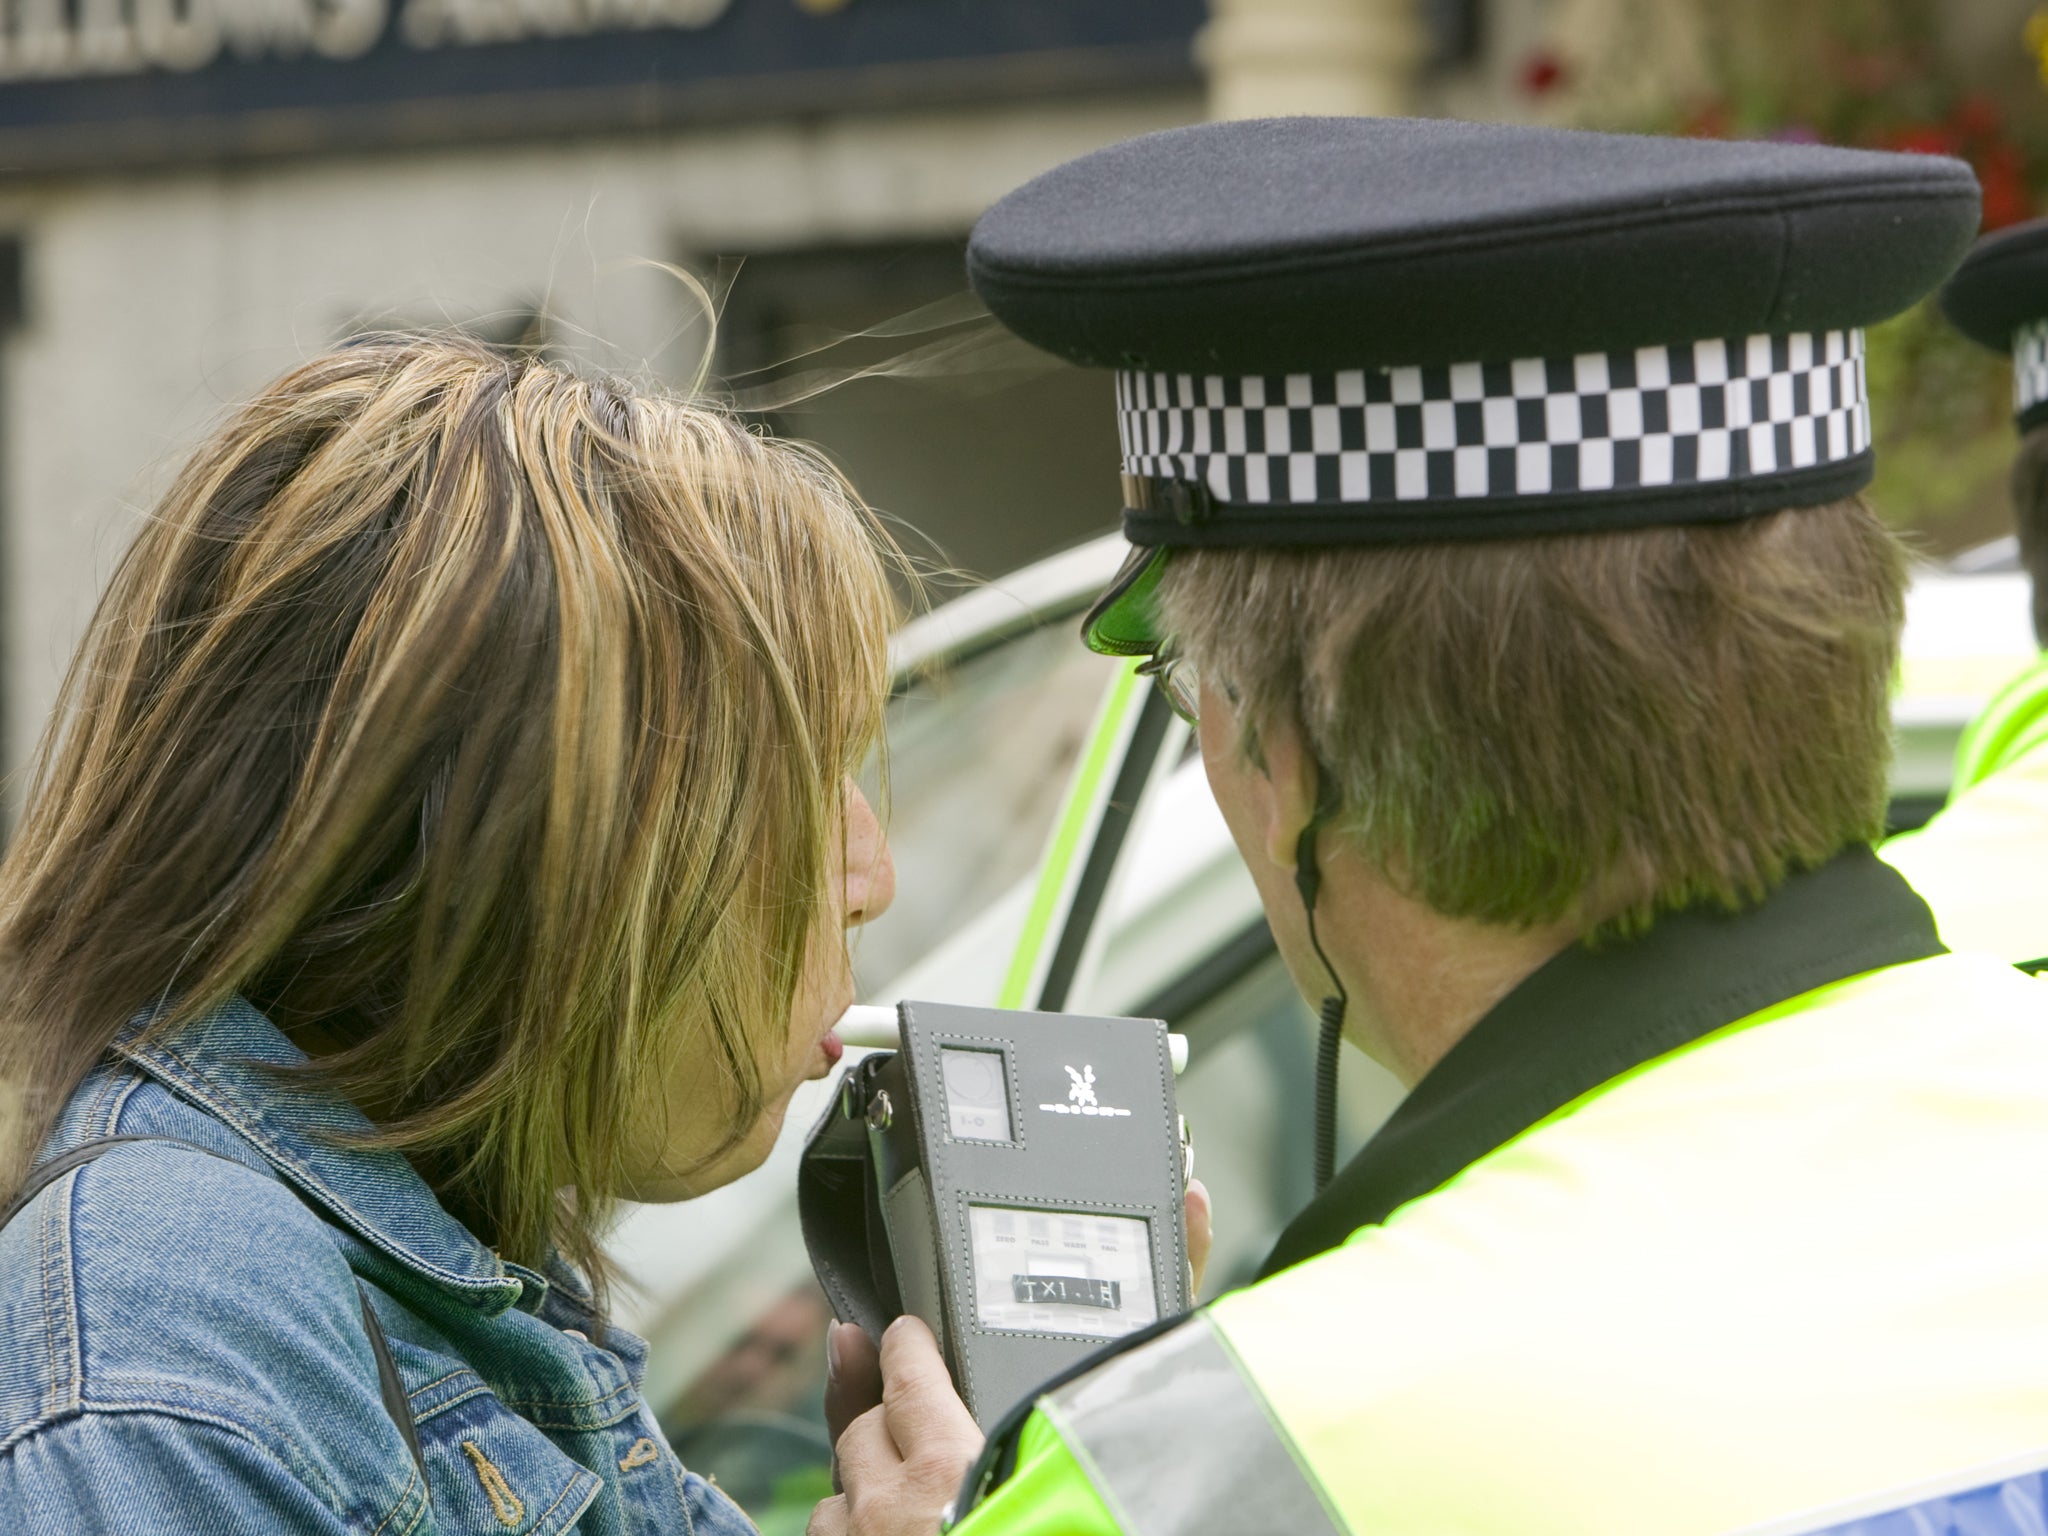 Over 6,500 under 18s have been caught drink driving by police in the UK since 2008